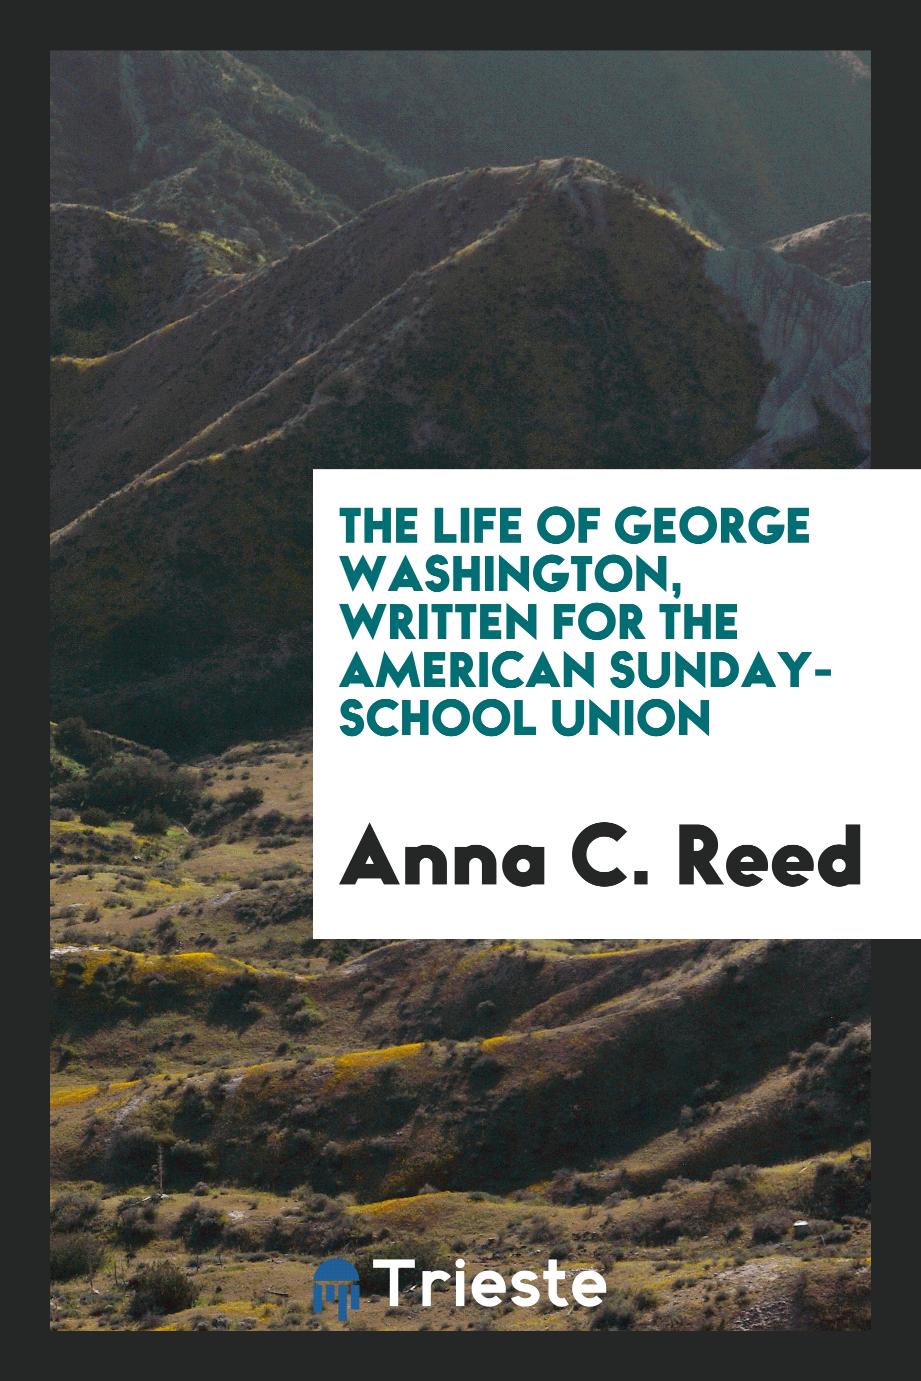 The life of George Washington, written for the American Sunday-School Union